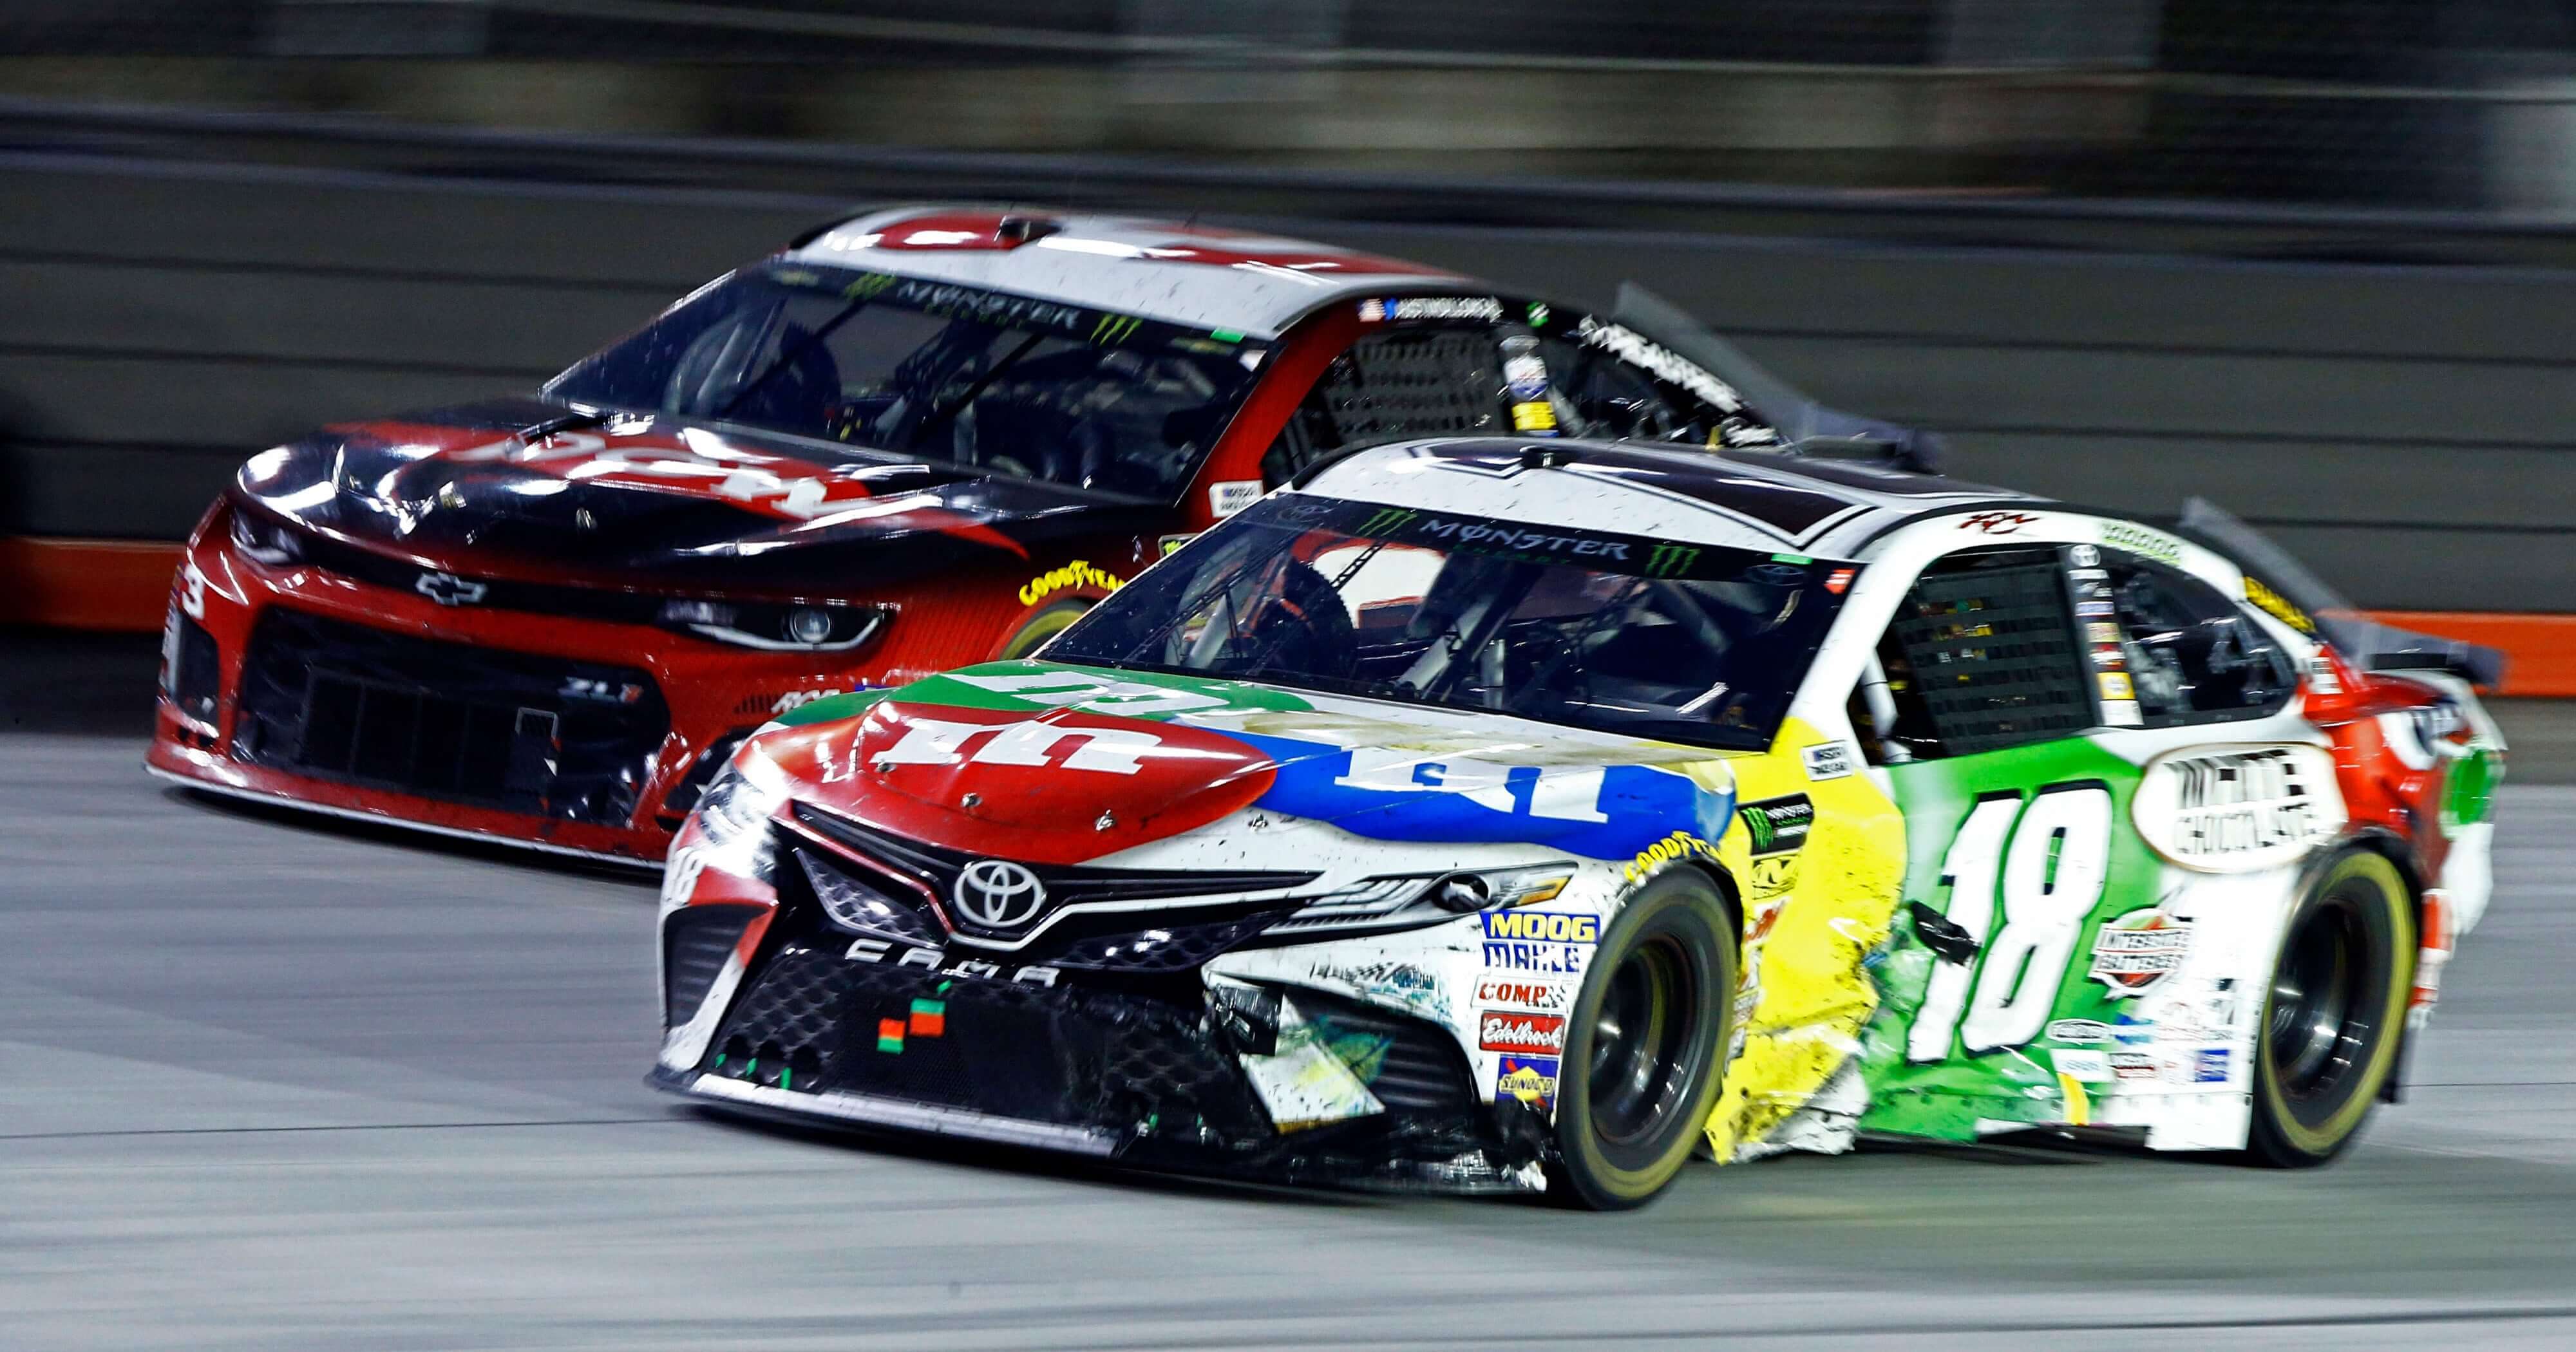 Kyle Busch (18) gets past Austin Dillon during the NASCAR Cup Series race Saturday in Bristol, Tenn.